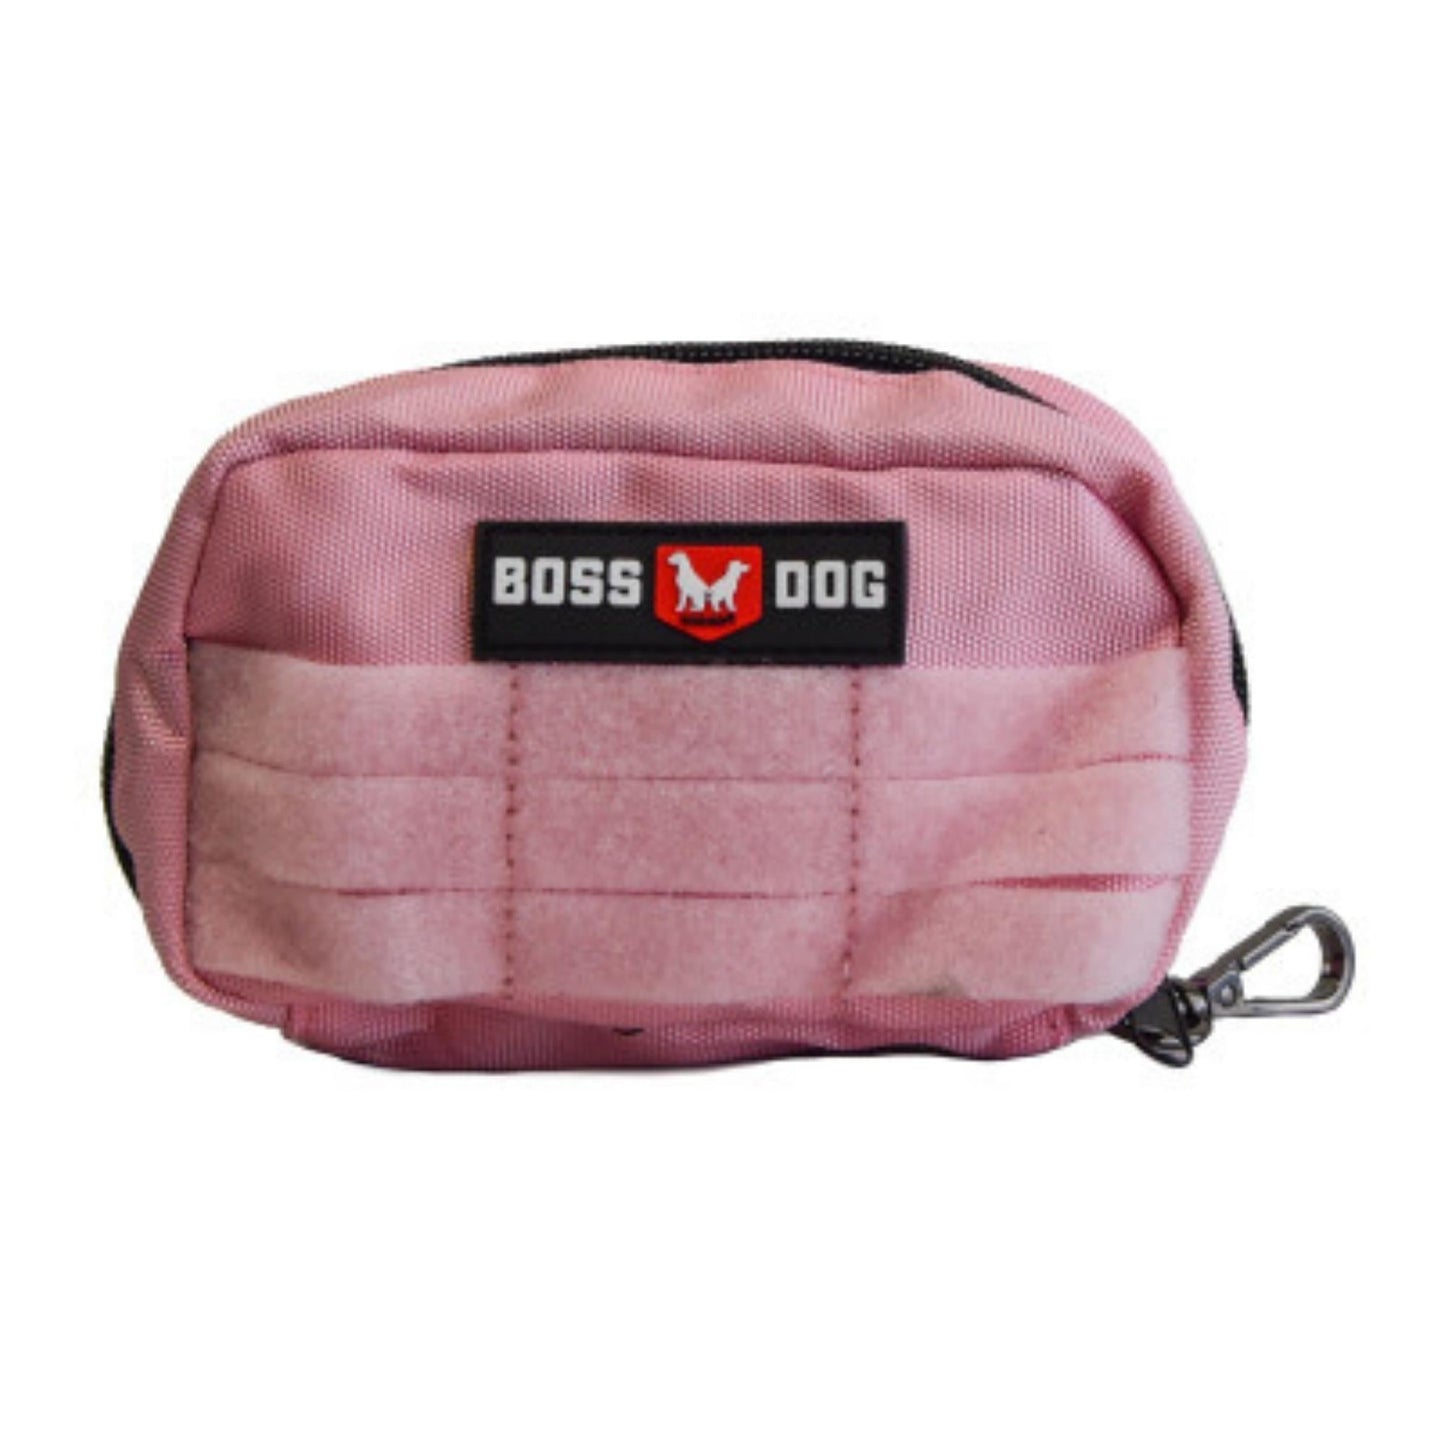 Boss Dog Tactical Molle Harness Bag Pink, 1ea/Small